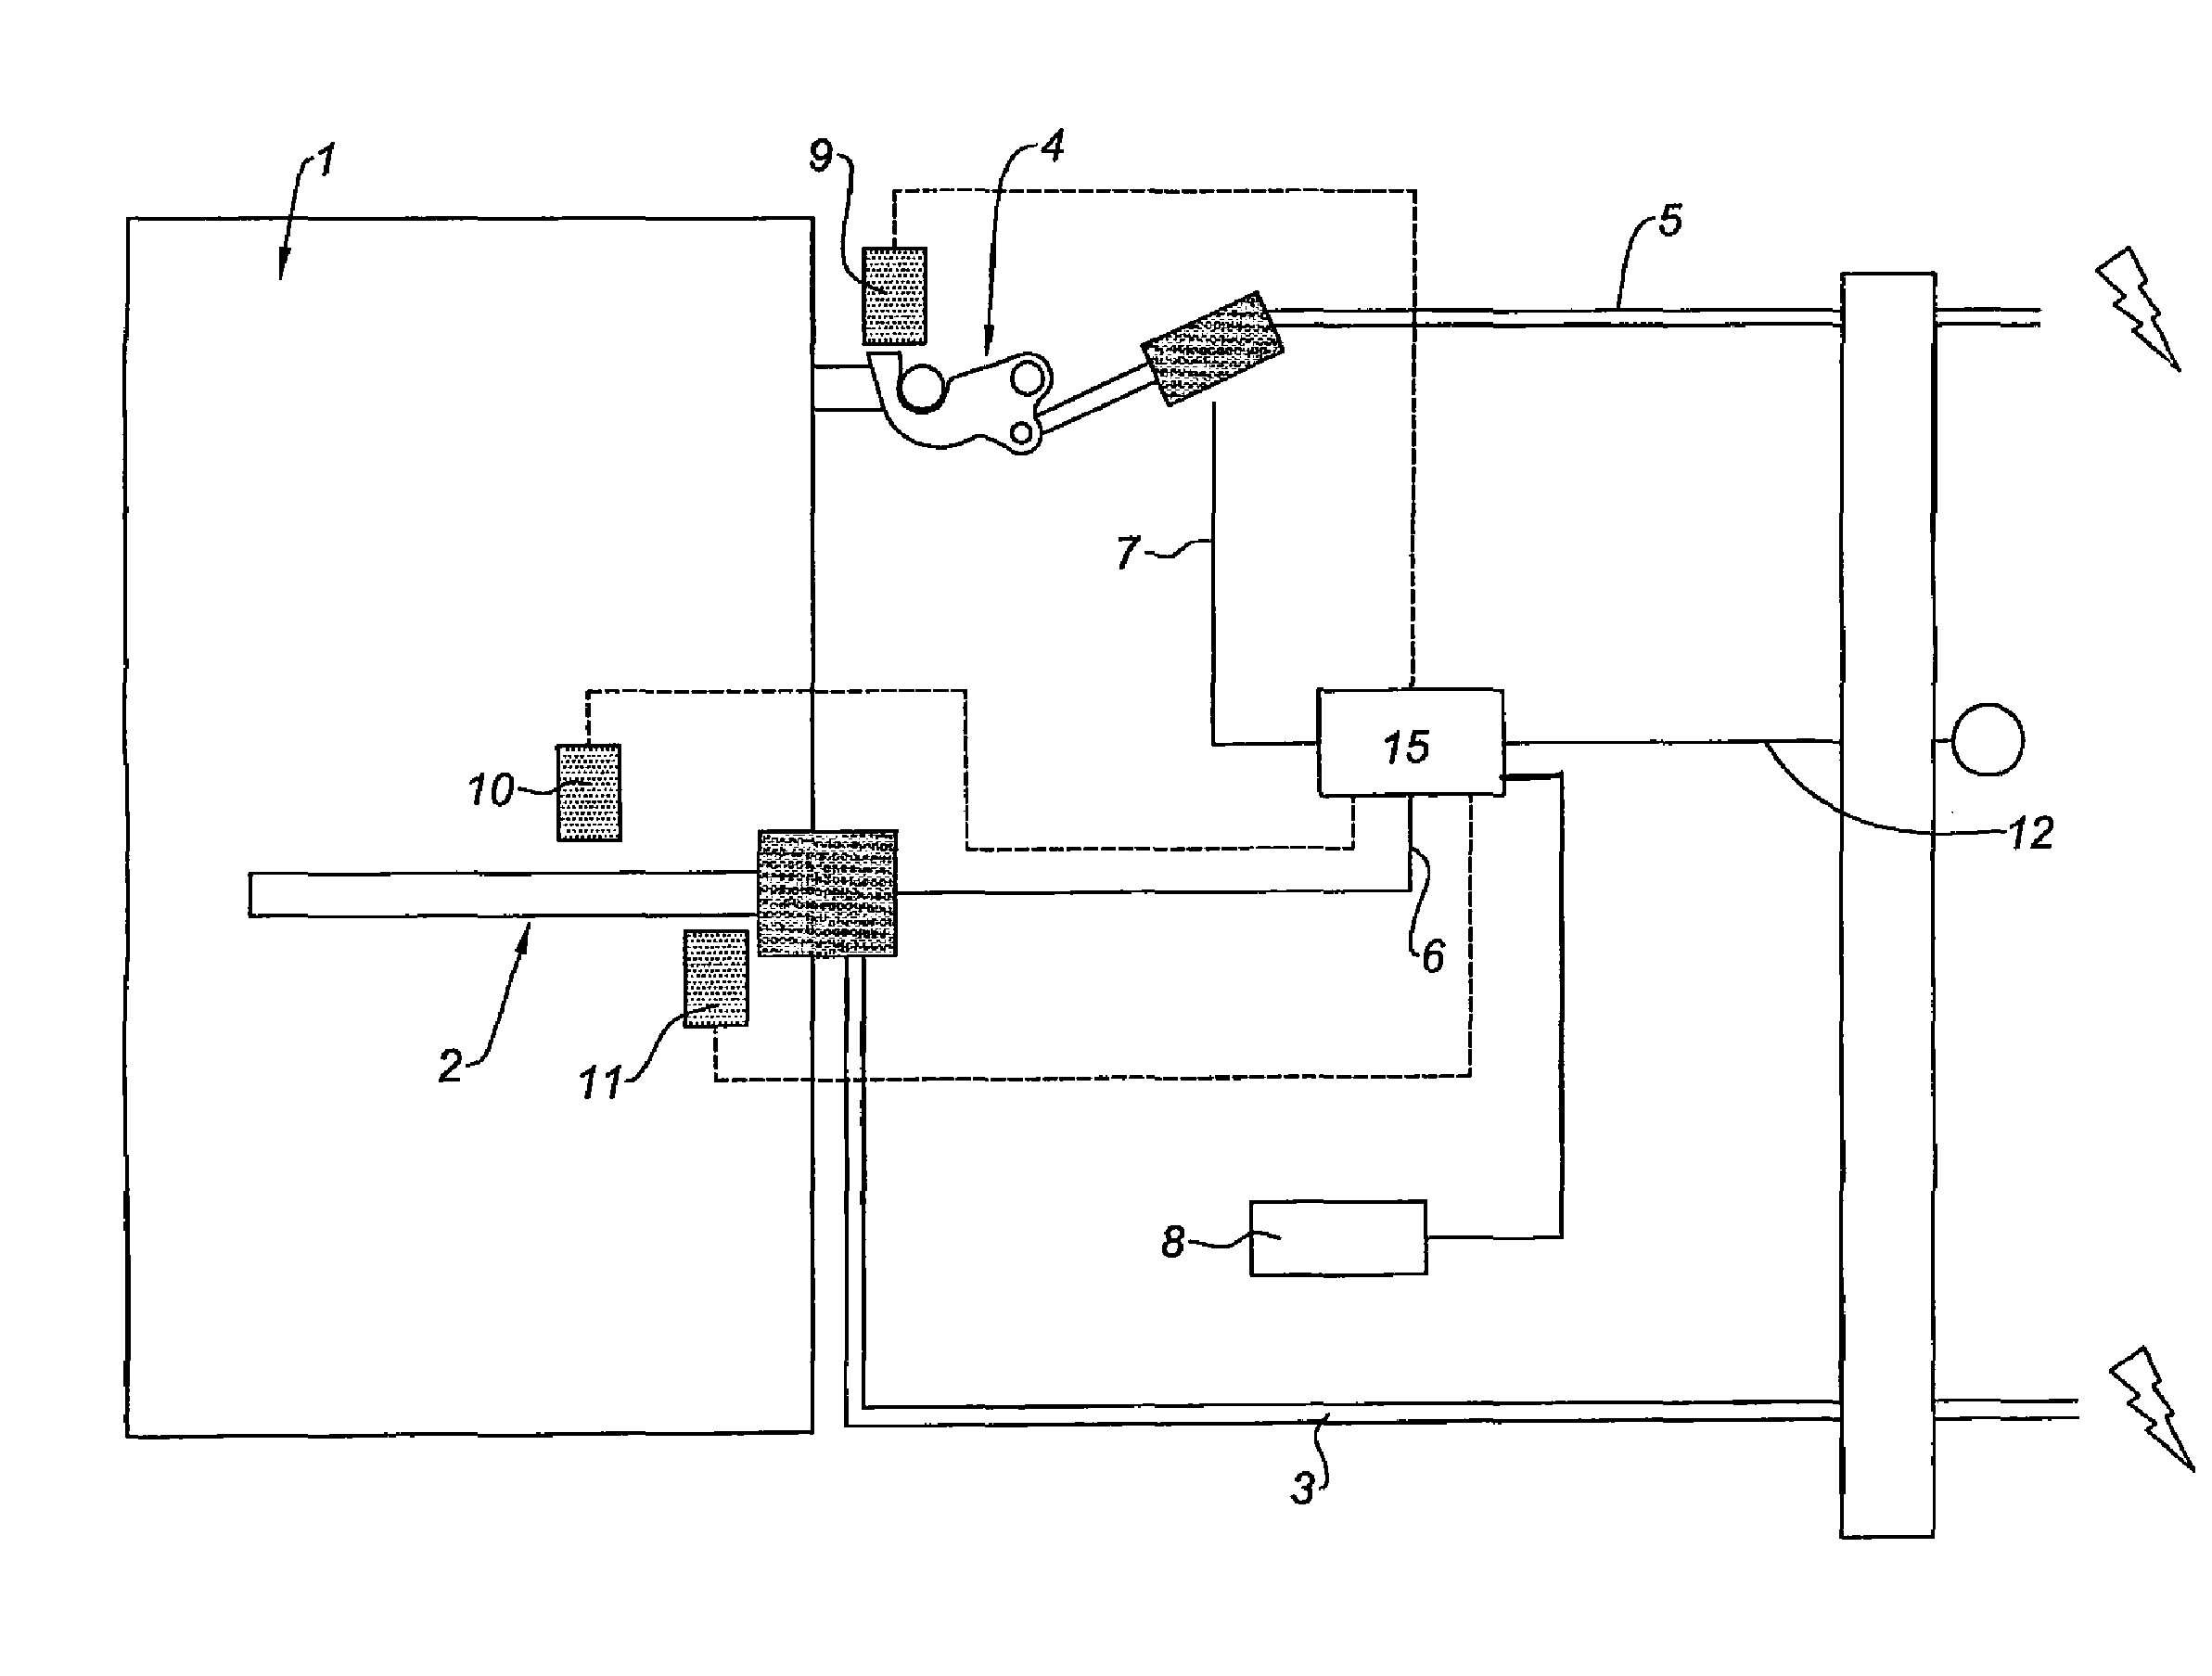 System for actuating and controlling the mobile cowling of a turbojet engine nacelle